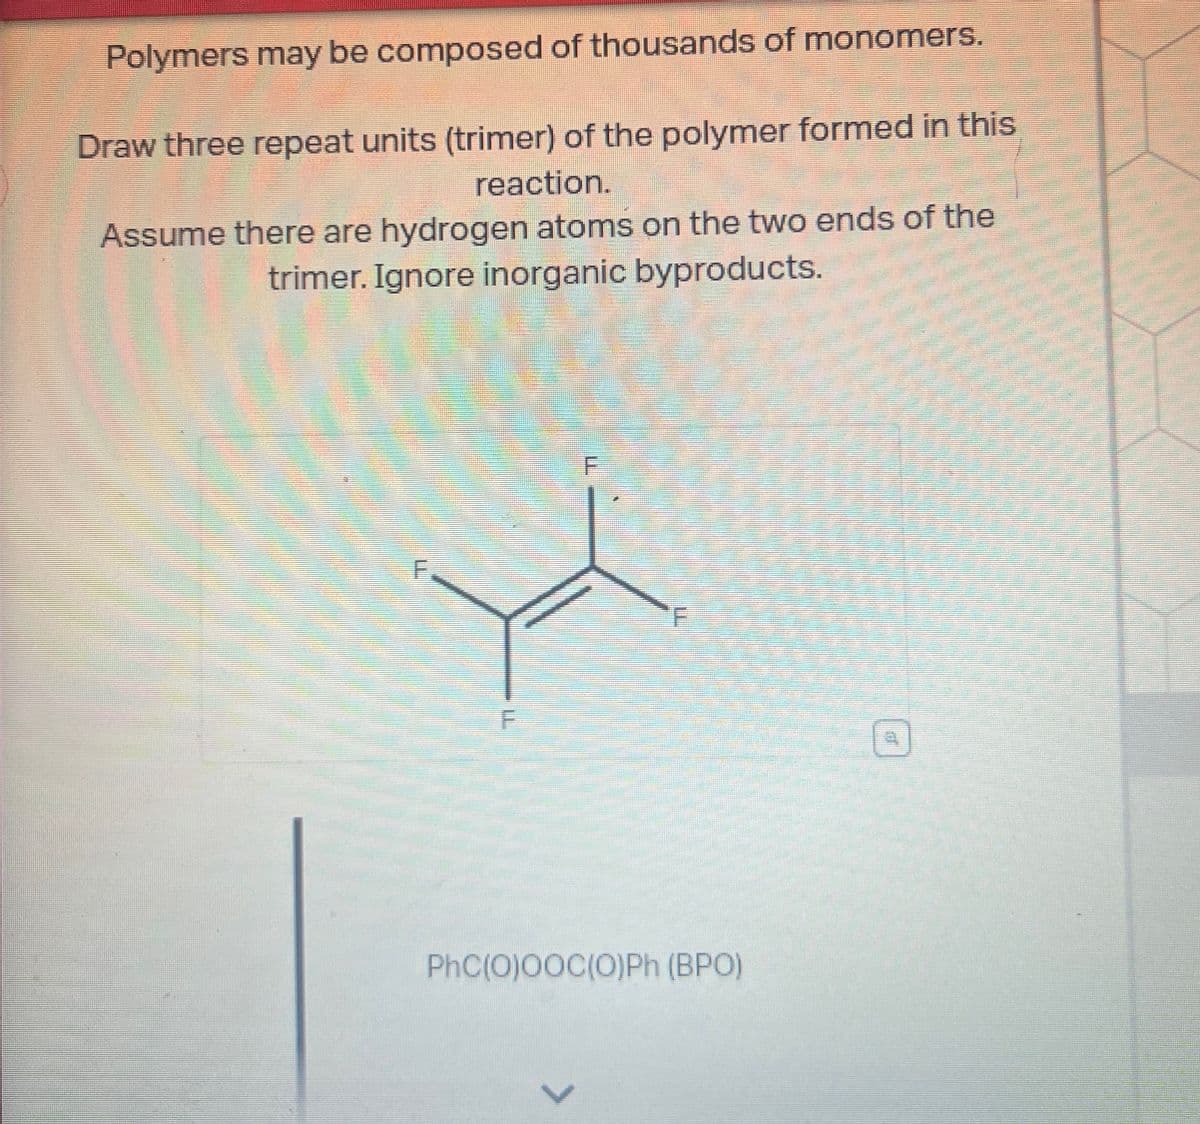 Polymers may be composed of thousands of monomers.
Draw three repeat units (trimer) of the polymer formed in this
reaction.
Assume there are hydrogen atoms on the two ends of the
trimer. Ignore inorganic byproducts.
F
F
F
T
PhC(O)OOC(O)Ph (BPO)